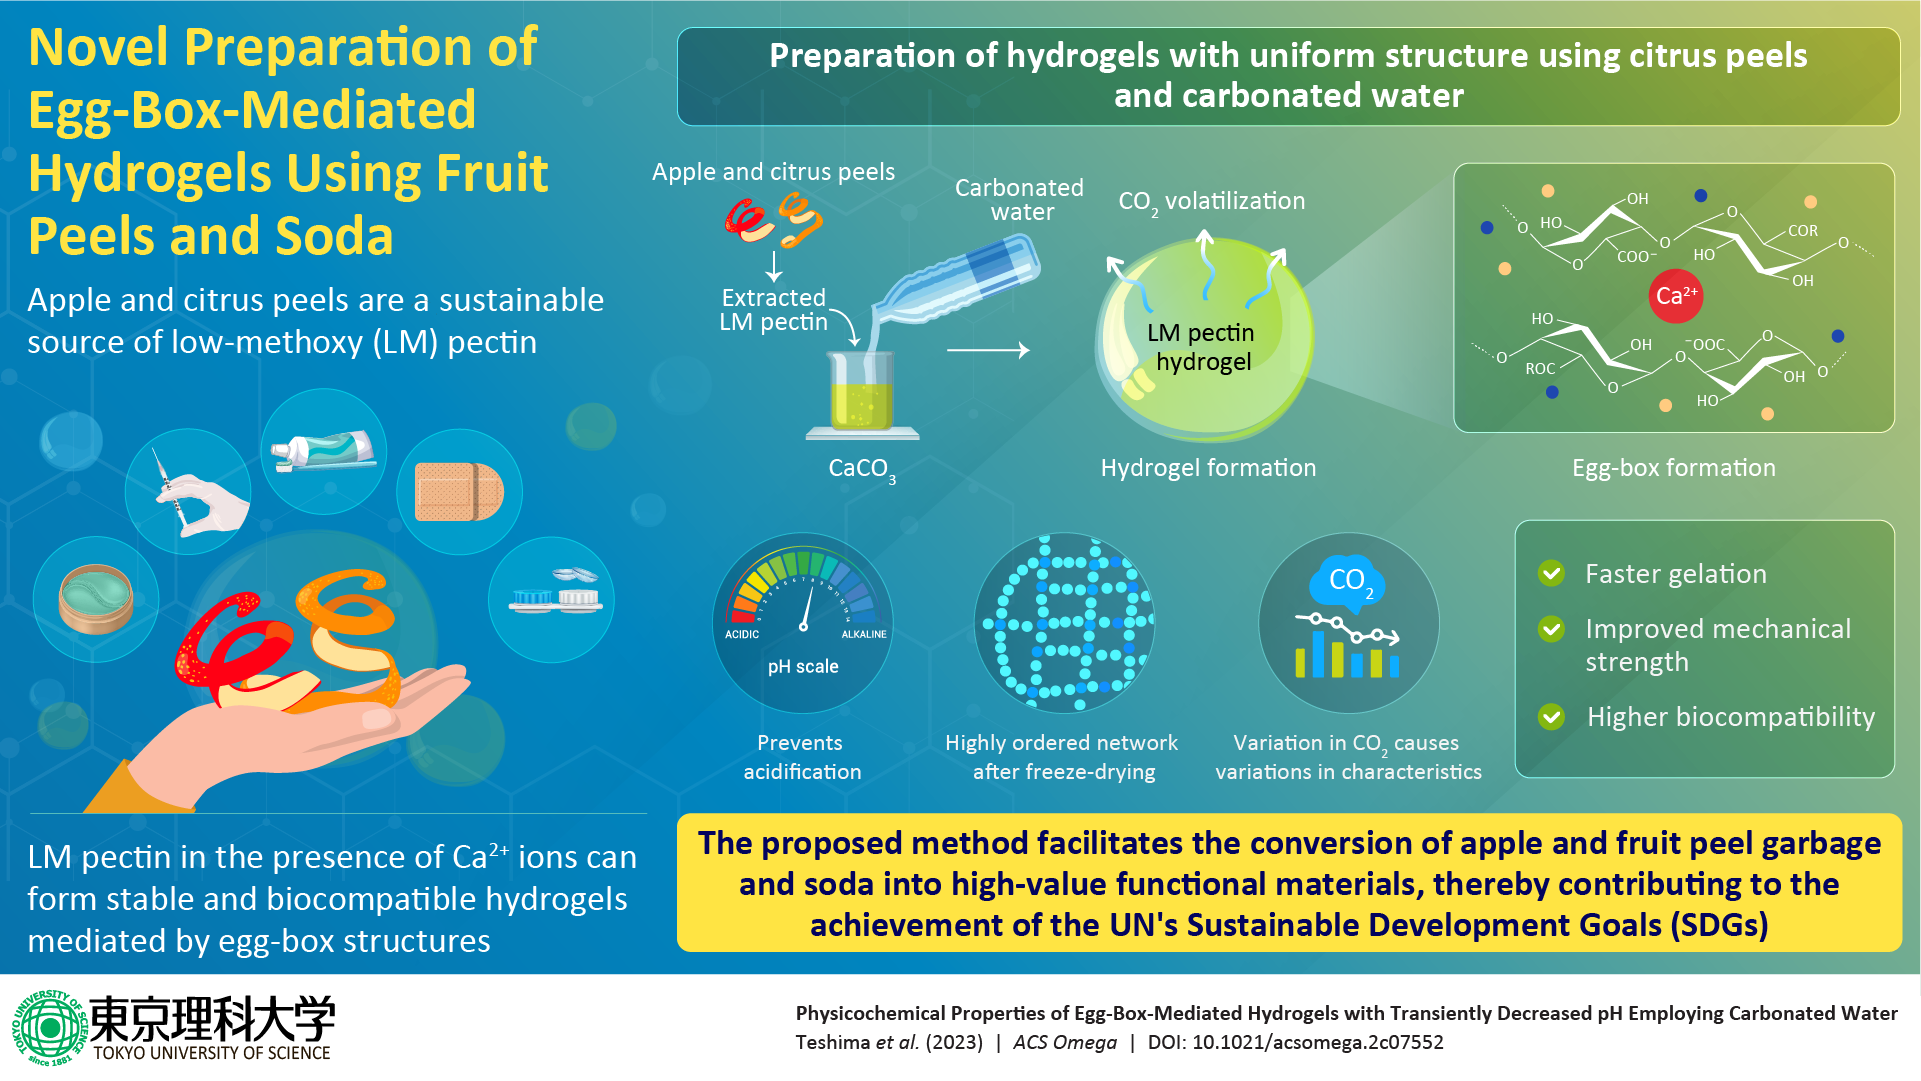 New Study Shows How Carbonated Water Can be Used to Tune Properties of Hydrogels for Various Uses